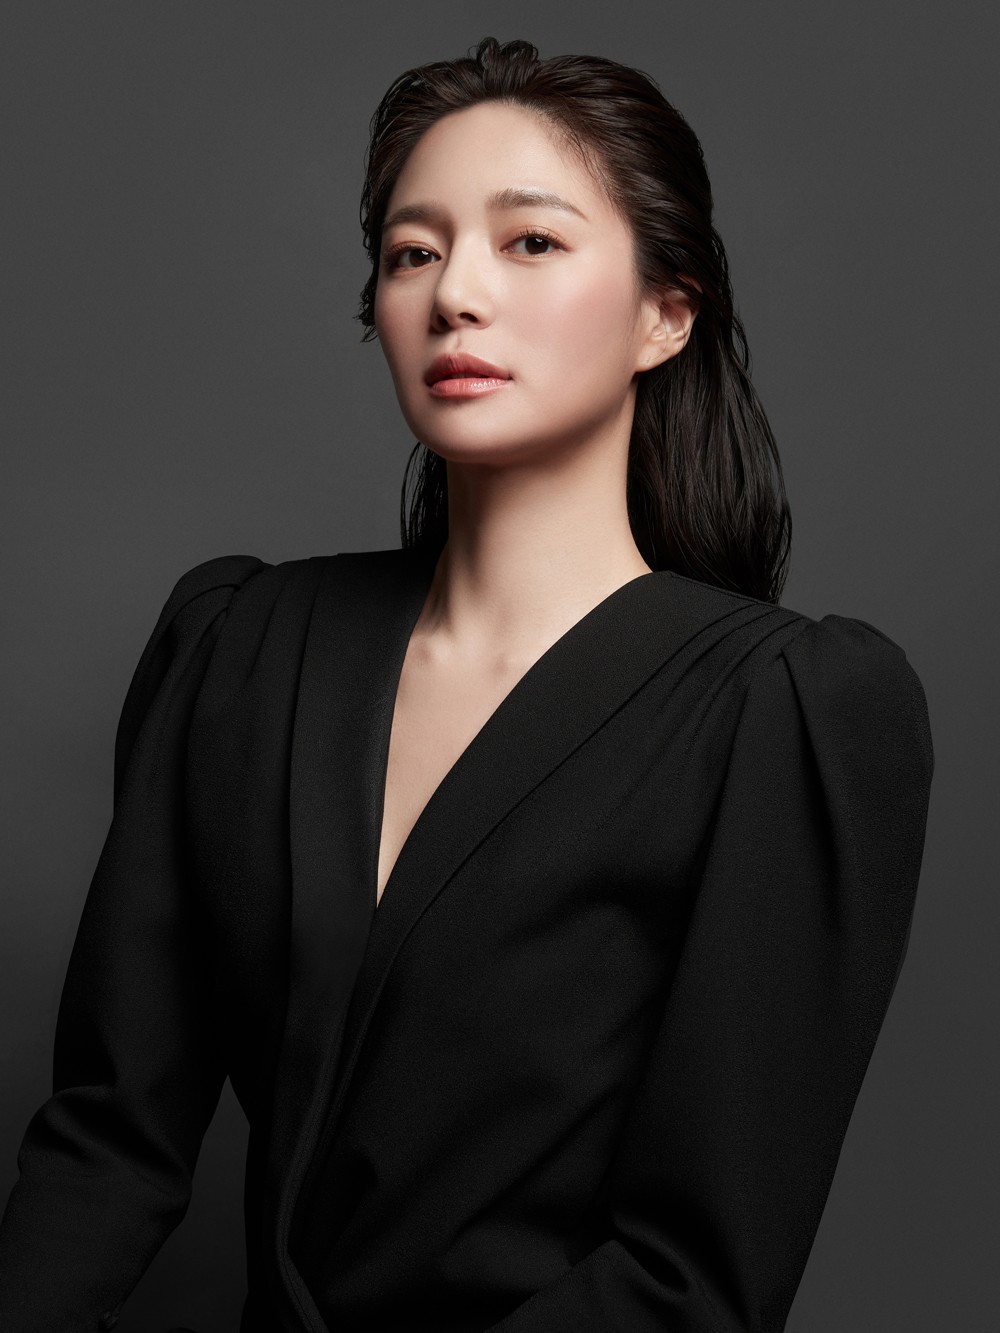 Actor Lee Elijah has emanated the dual charisma of purity and intensity through the picture.Lee Elijah, in a picture released on Wednesday, expressed a completely different image in a black costume; in a bright smile, Lee Elijah showed a pure and sophisticated feel.In another cut, Lee Elijah spewed an intense look with a dour look.Actor Lee Elijah owns both innocence and charisma. She reveals her own beauty know-how with two themes: Day & Night.We have even shown a different image that has not been released in the meantime.Meanwhile, Lee Elijah appeared in the JTBC drama The Advisor 2 - People Moving the World, which was concluded on the 10th.